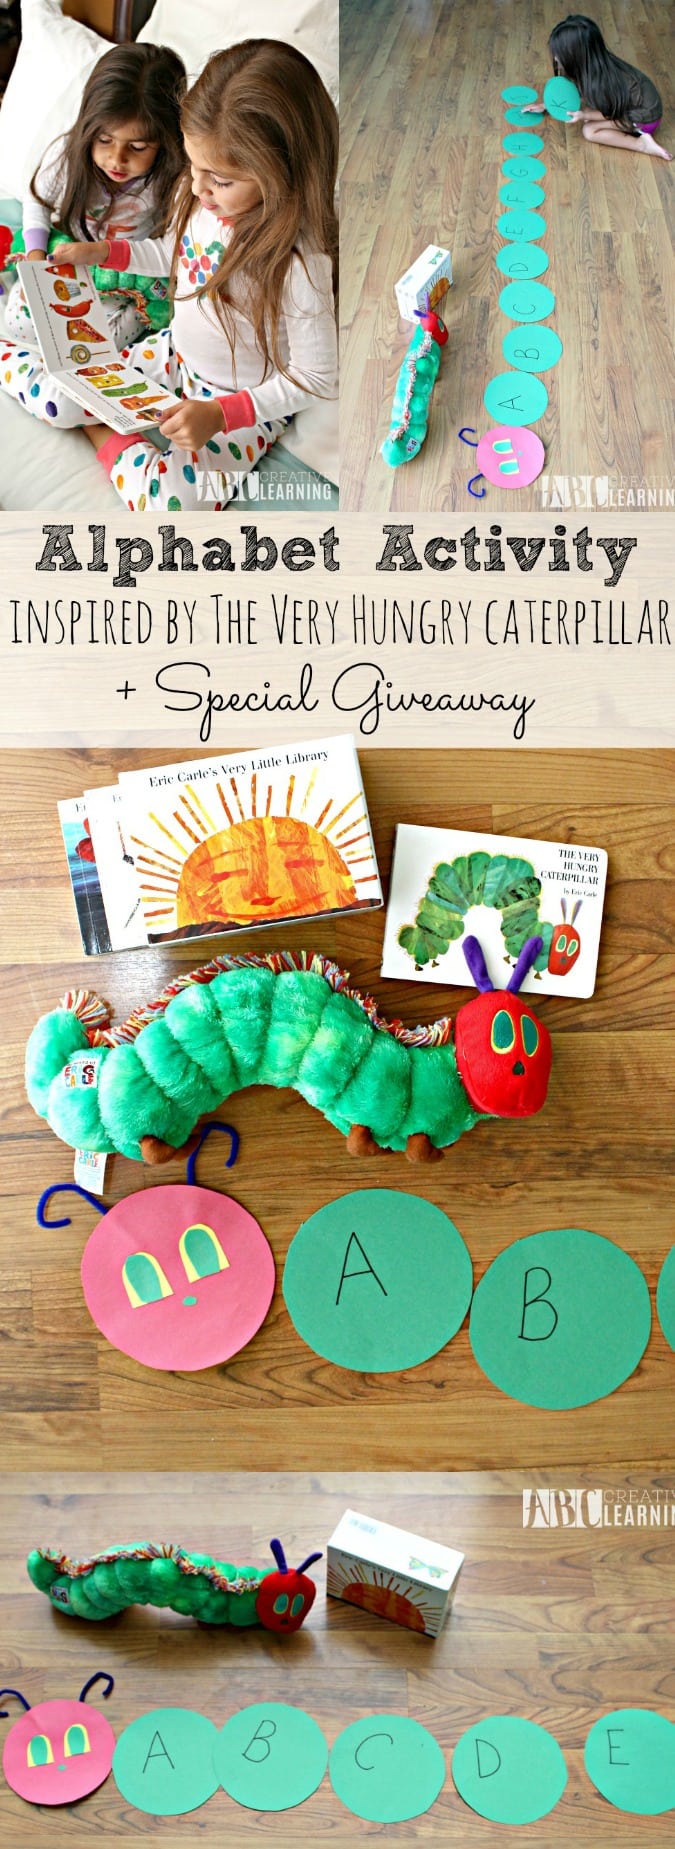 Alphabet Activity Inspired by The Very Hungry Caterpillar + Giveaway - simplytodaylife.com